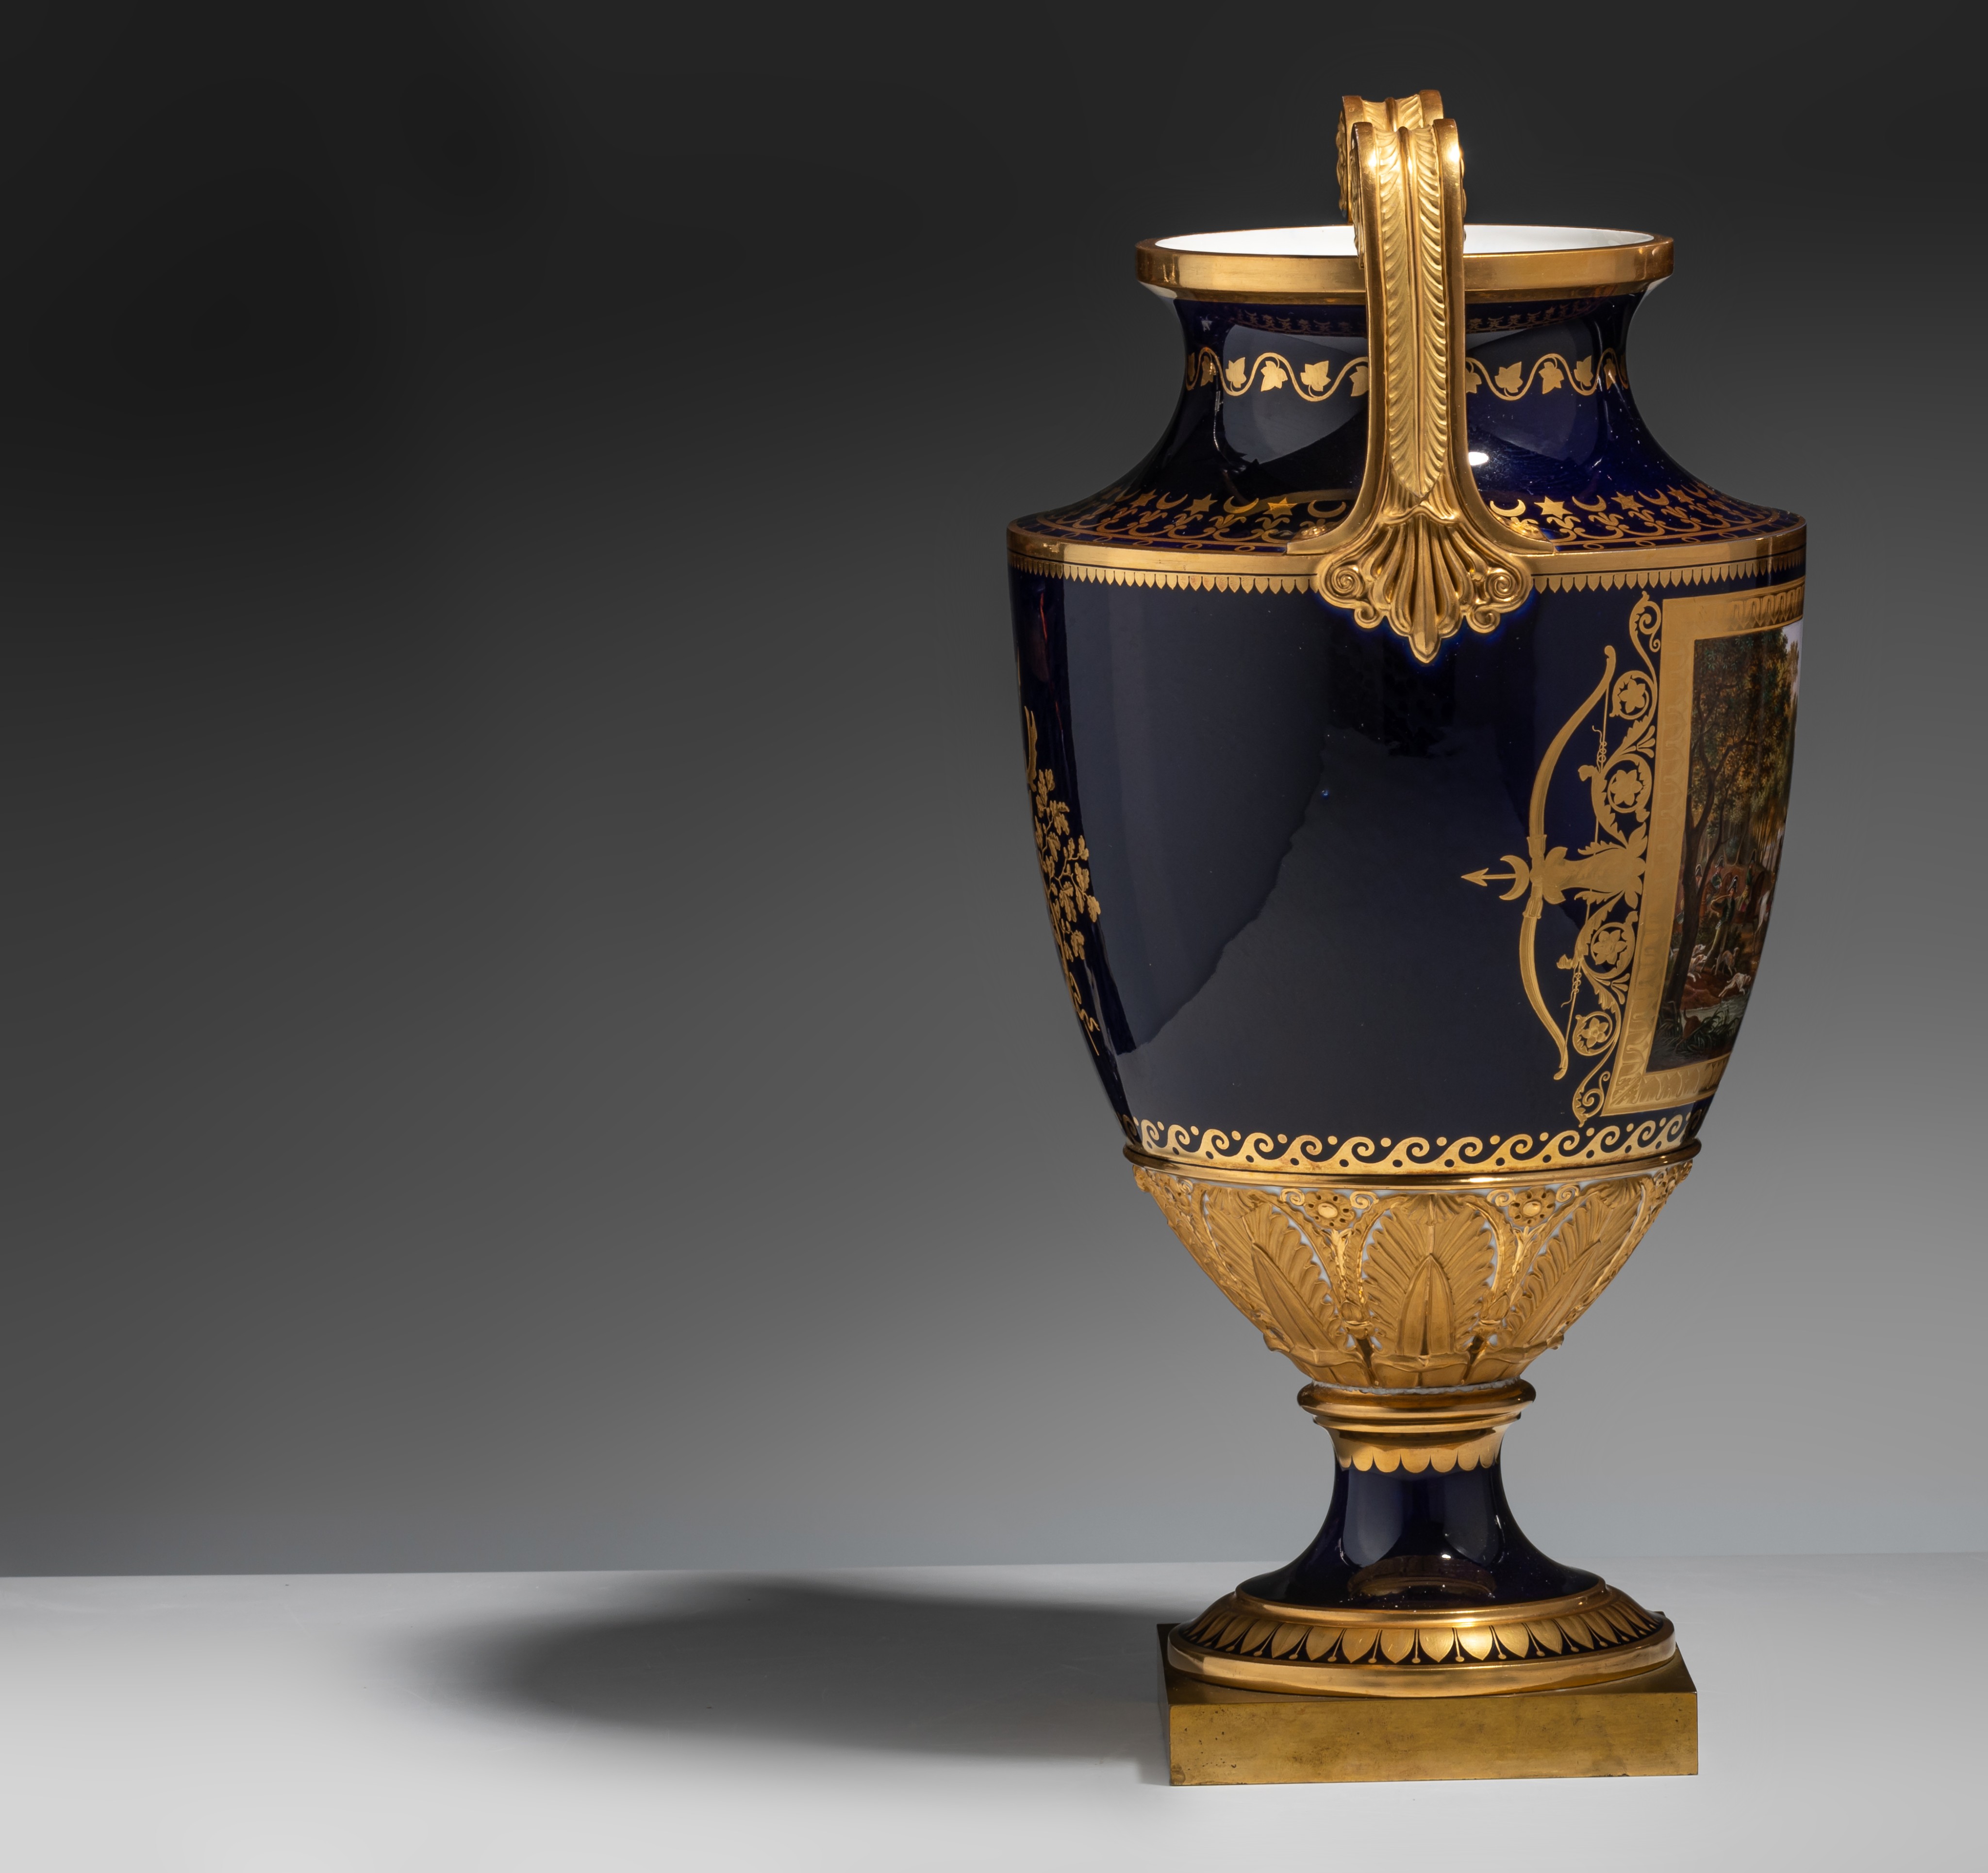 A very fine Empire Sèvres porcelain vase by Jean Charles Develly (1783-1862), 1819, H 44,5 cm - Image 5 of 7